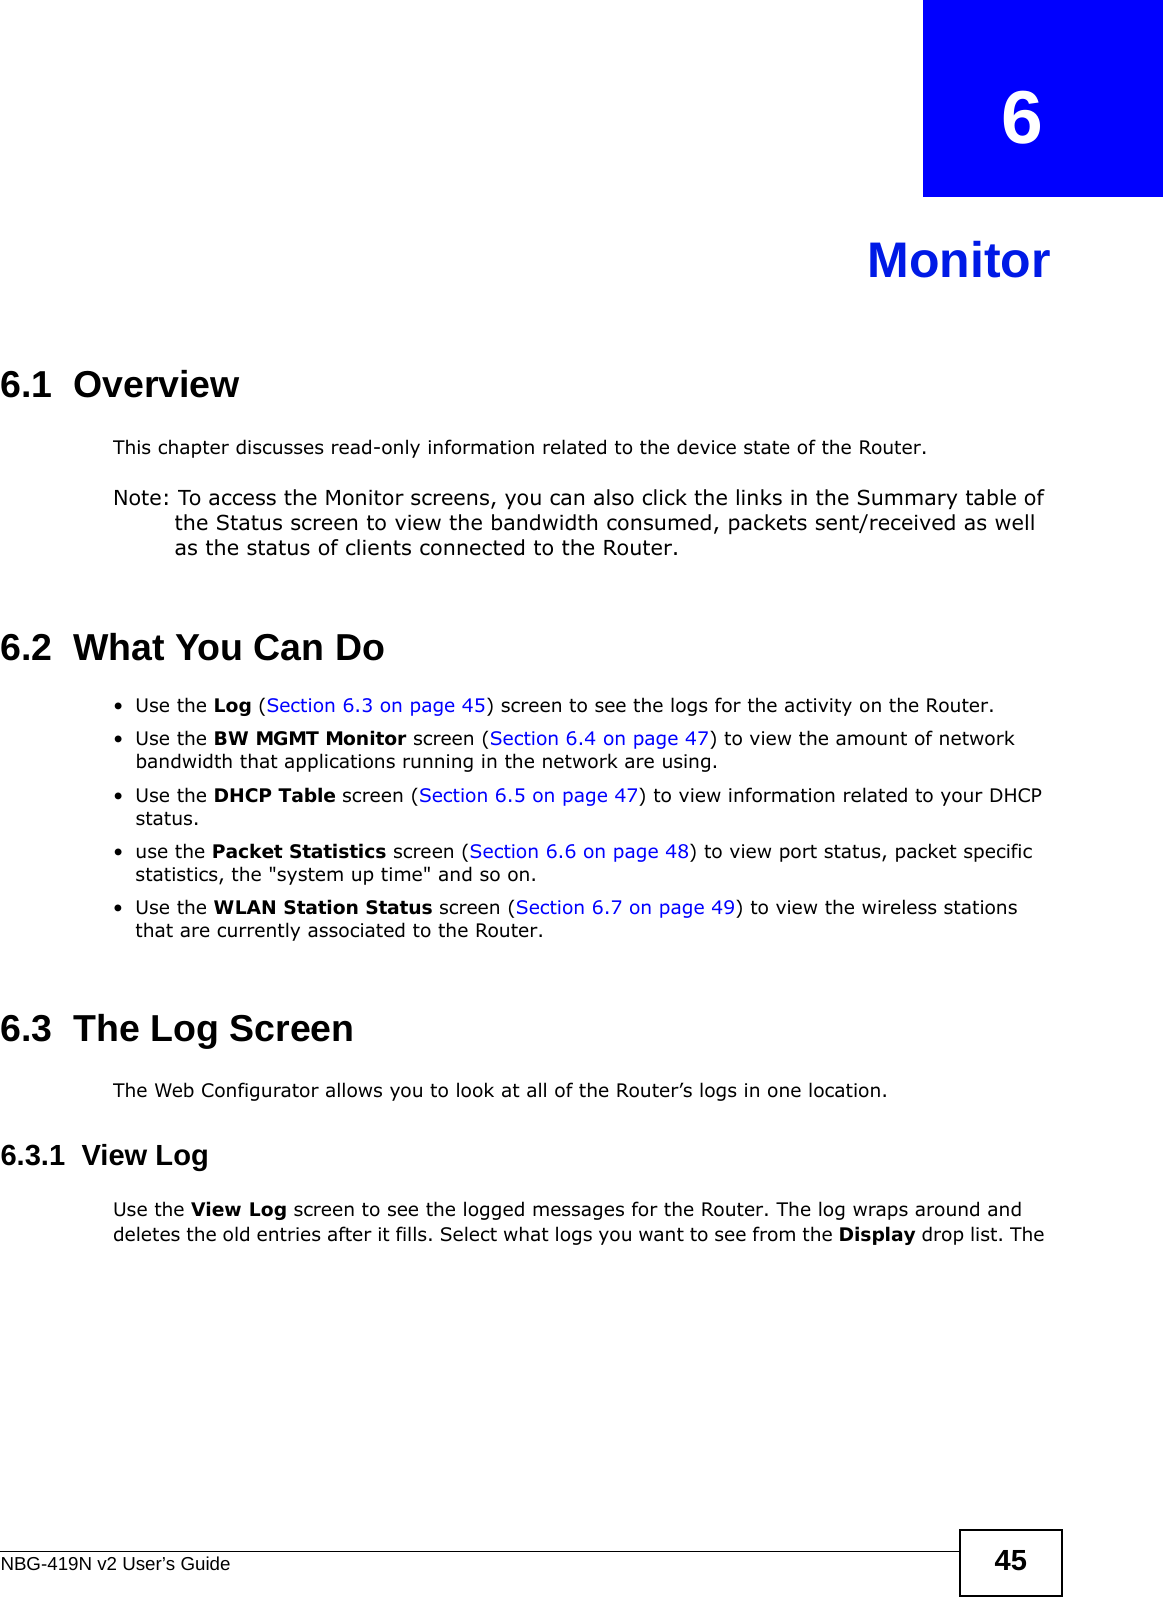 NBG-419N v2 User’s Guide 45CHAPTER   6Monitor6.1  OverviewThis chapter discusses read-only information related to the device state of the Router. Note: To access the Monitor screens, you can also click the links in the Summary table of the Status screen to view the bandwidth consumed, packets sent/received as well as the status of clients connected to the Router.6.2  What You Can Do•Use the Log (Section 6.3 on page 45) screen to see the logs for the activity on the Router.•Use the BW MGMT Monitor screen (Section 6.4 on page 47) to view the amount of network bandwidth that applications running in the network are using.•Use the DHCP Table screen (Section 6.5 on page 47) to view information related to your DHCP status.•use the Packet Statistics screen (Section 6.6 on page 48) to view port status, packet specific statistics, the &quot;system up time&quot; and so on.•Use the WLAN Station Status screen (Section 6.7 on page 49) to view the wireless stations that are currently associated to the Router.6.3  The Log ScreenThe Web Configurator allows you to look at all of the Router’s logs in one location.6.3.1  View LogUse the View Log screen to see the logged messages for the Router. The log wraps around and deletes the old entries after it fills. Select what logs you want to see from the Display drop list. The 